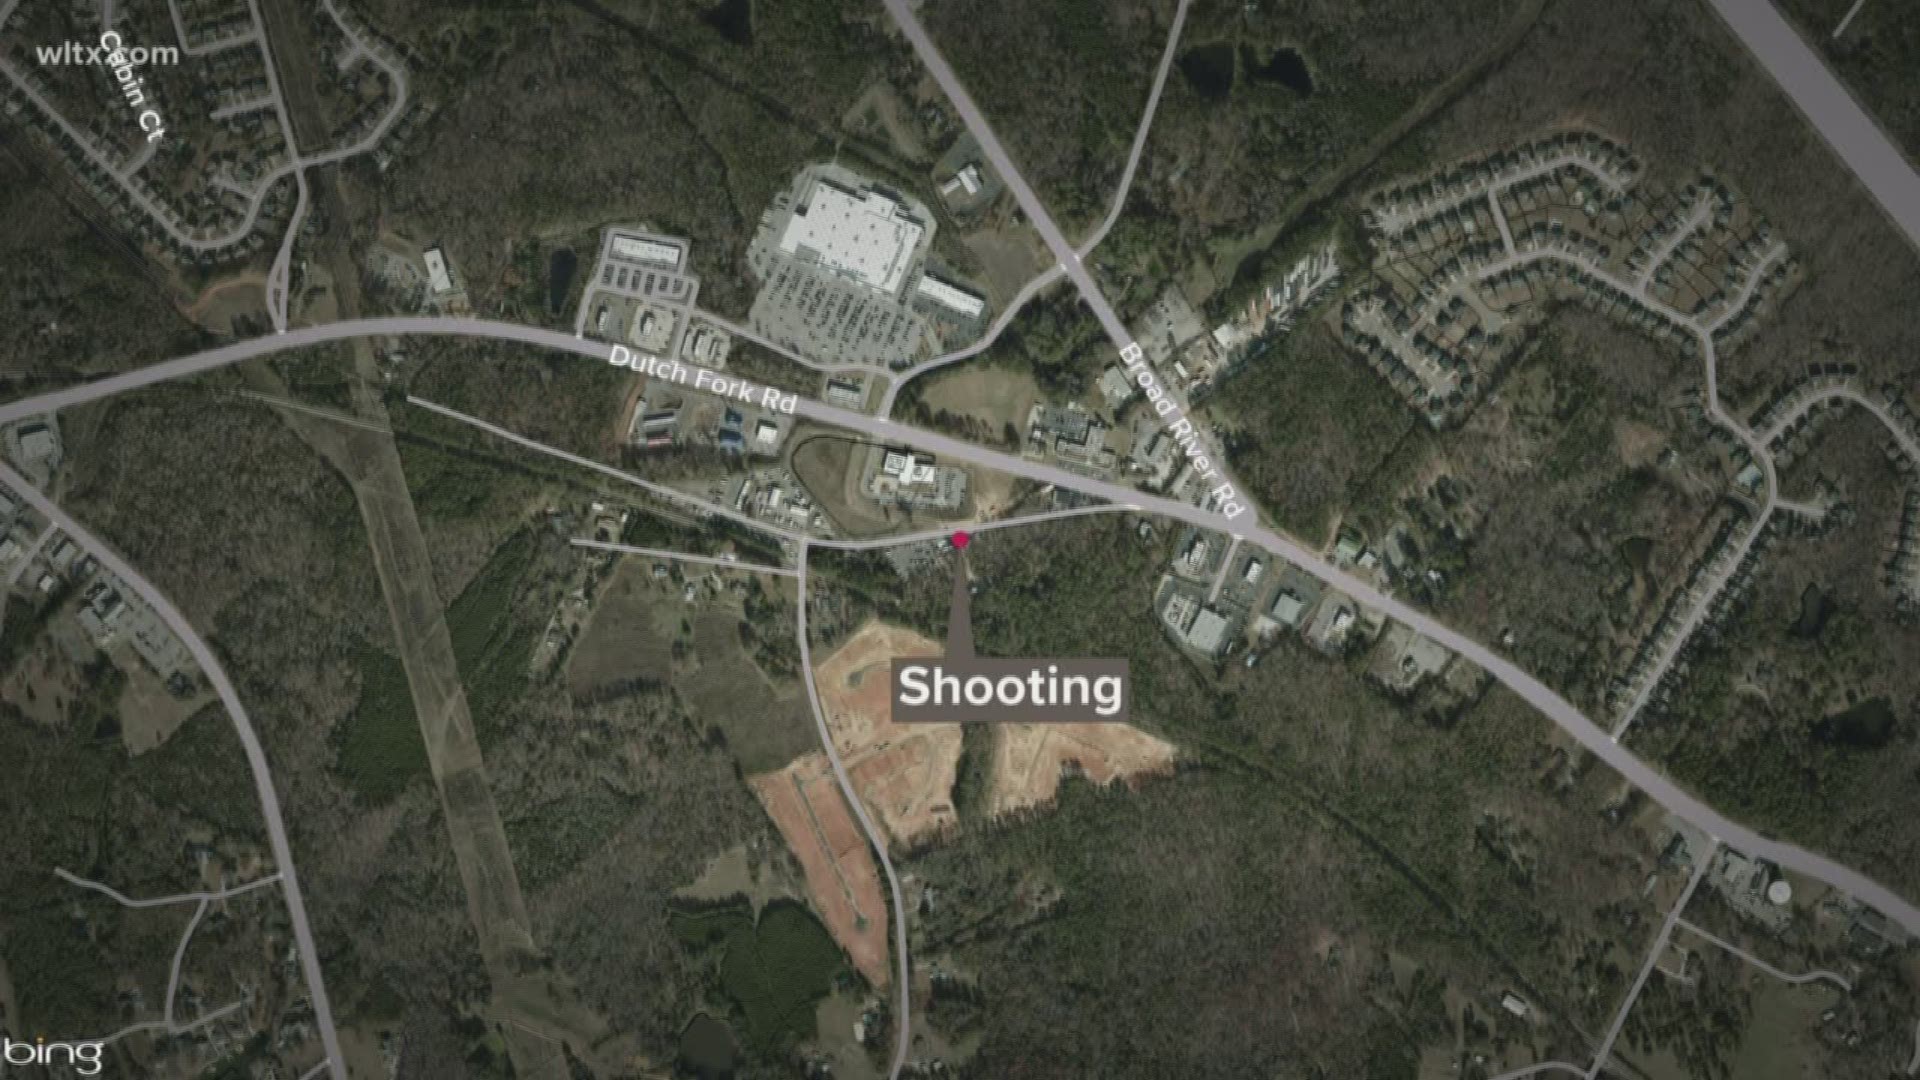 The shooting happened on Old Dutch Fork road inside of a car.